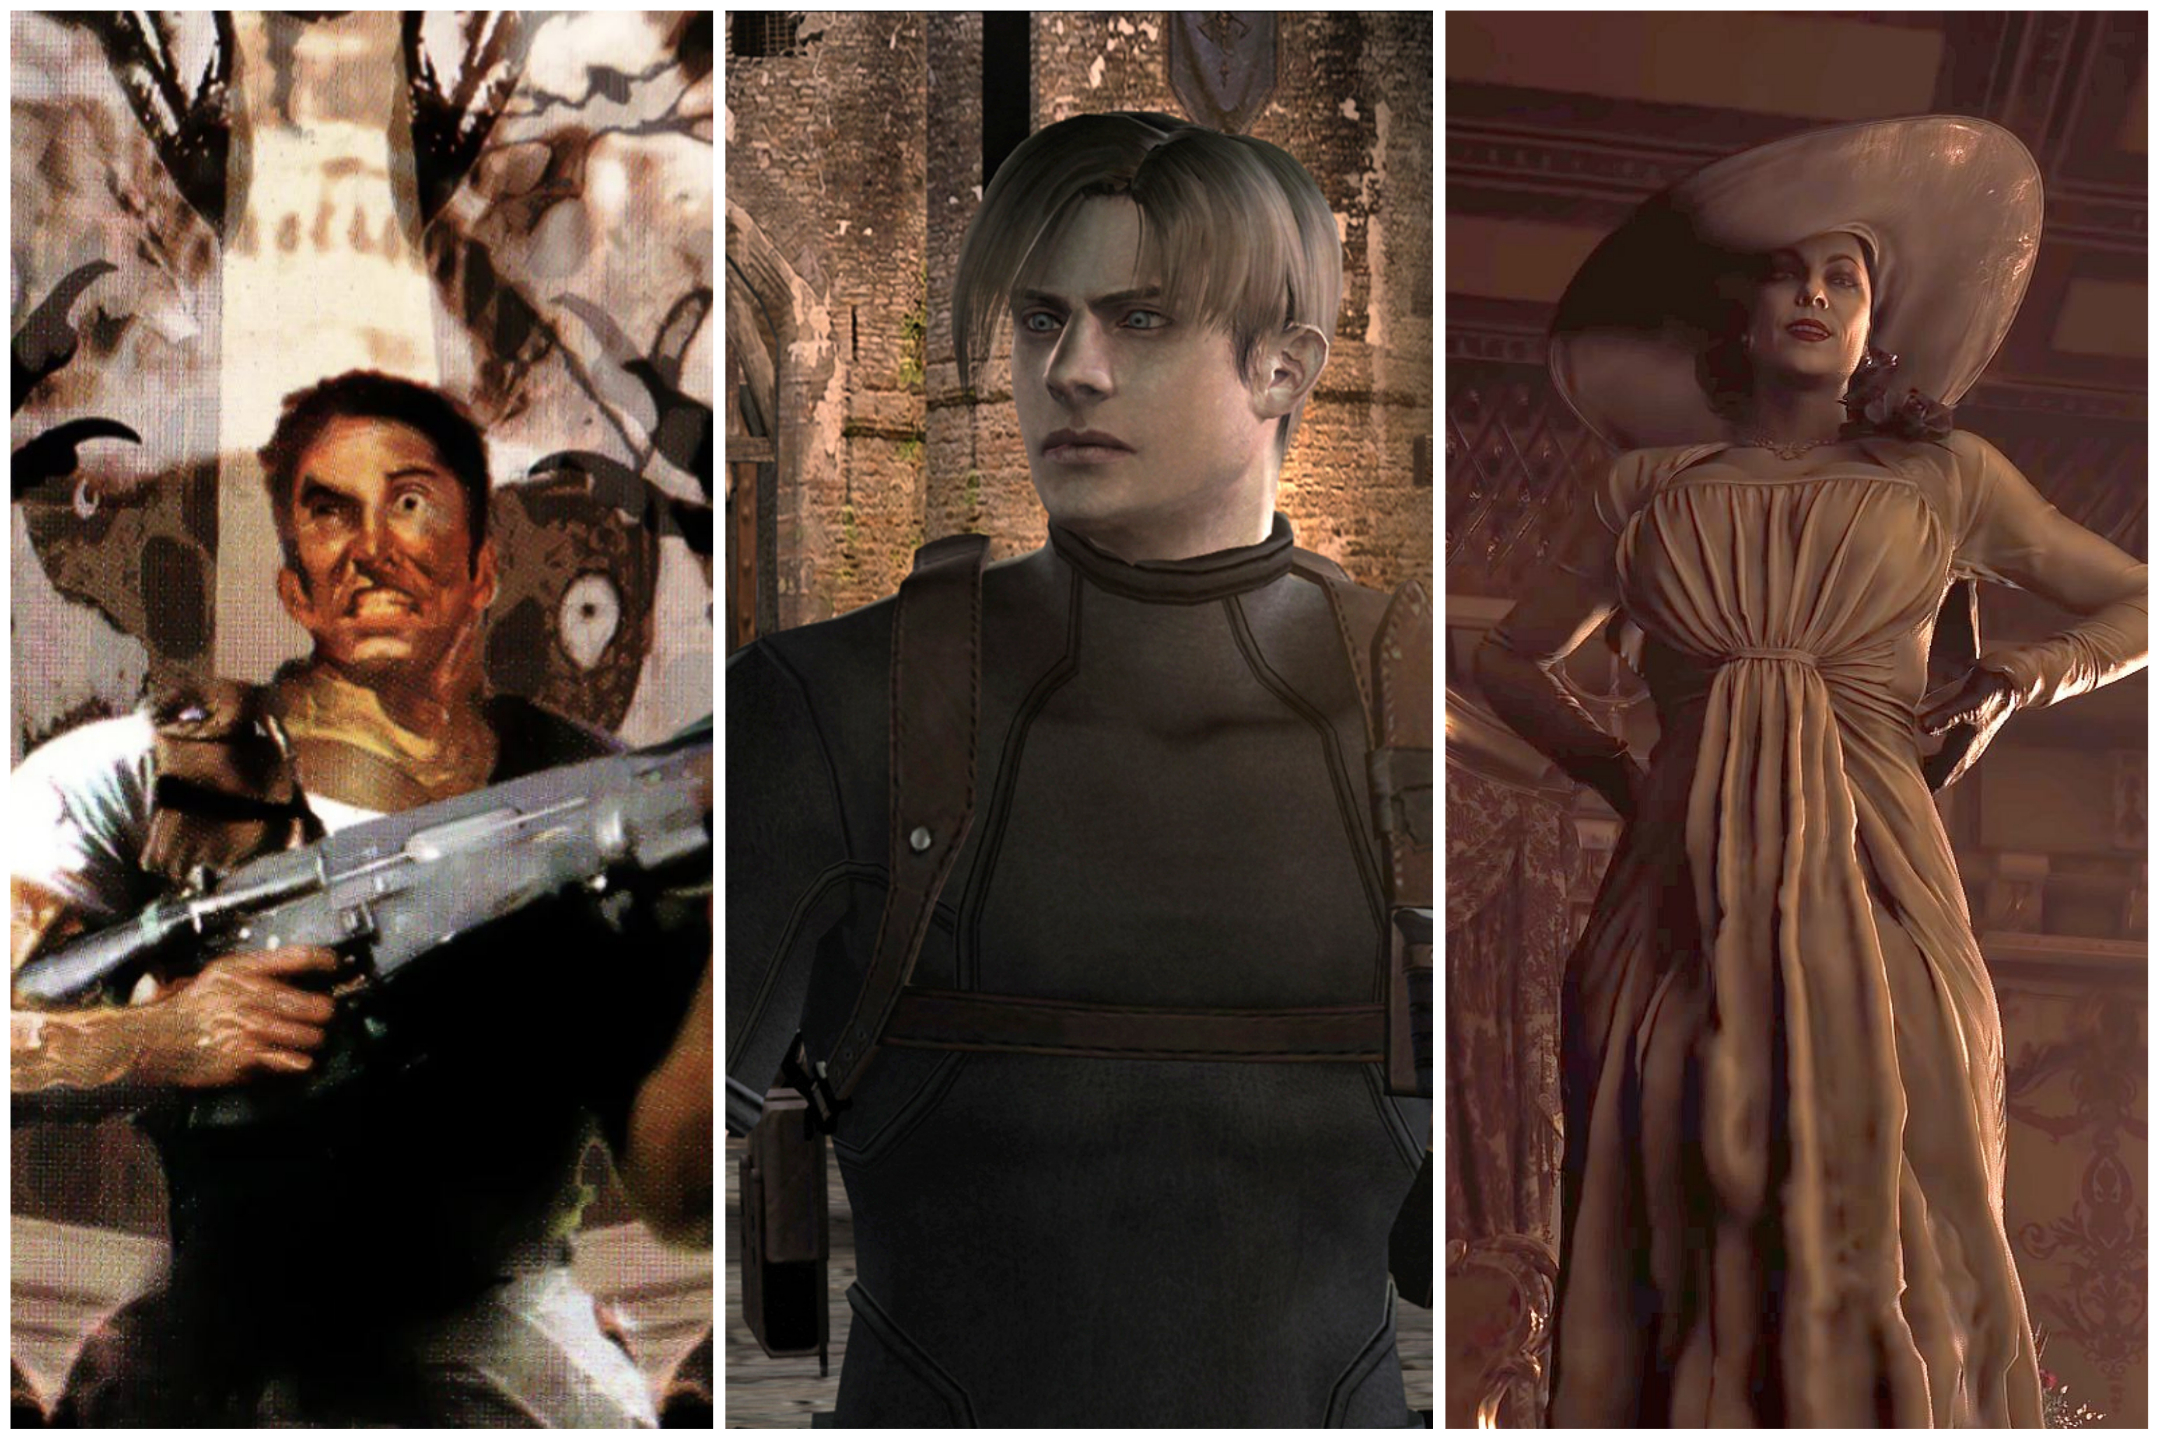 Resident Evil 4 Director Details Tough Story Deadlines and Hopes for a  Remake